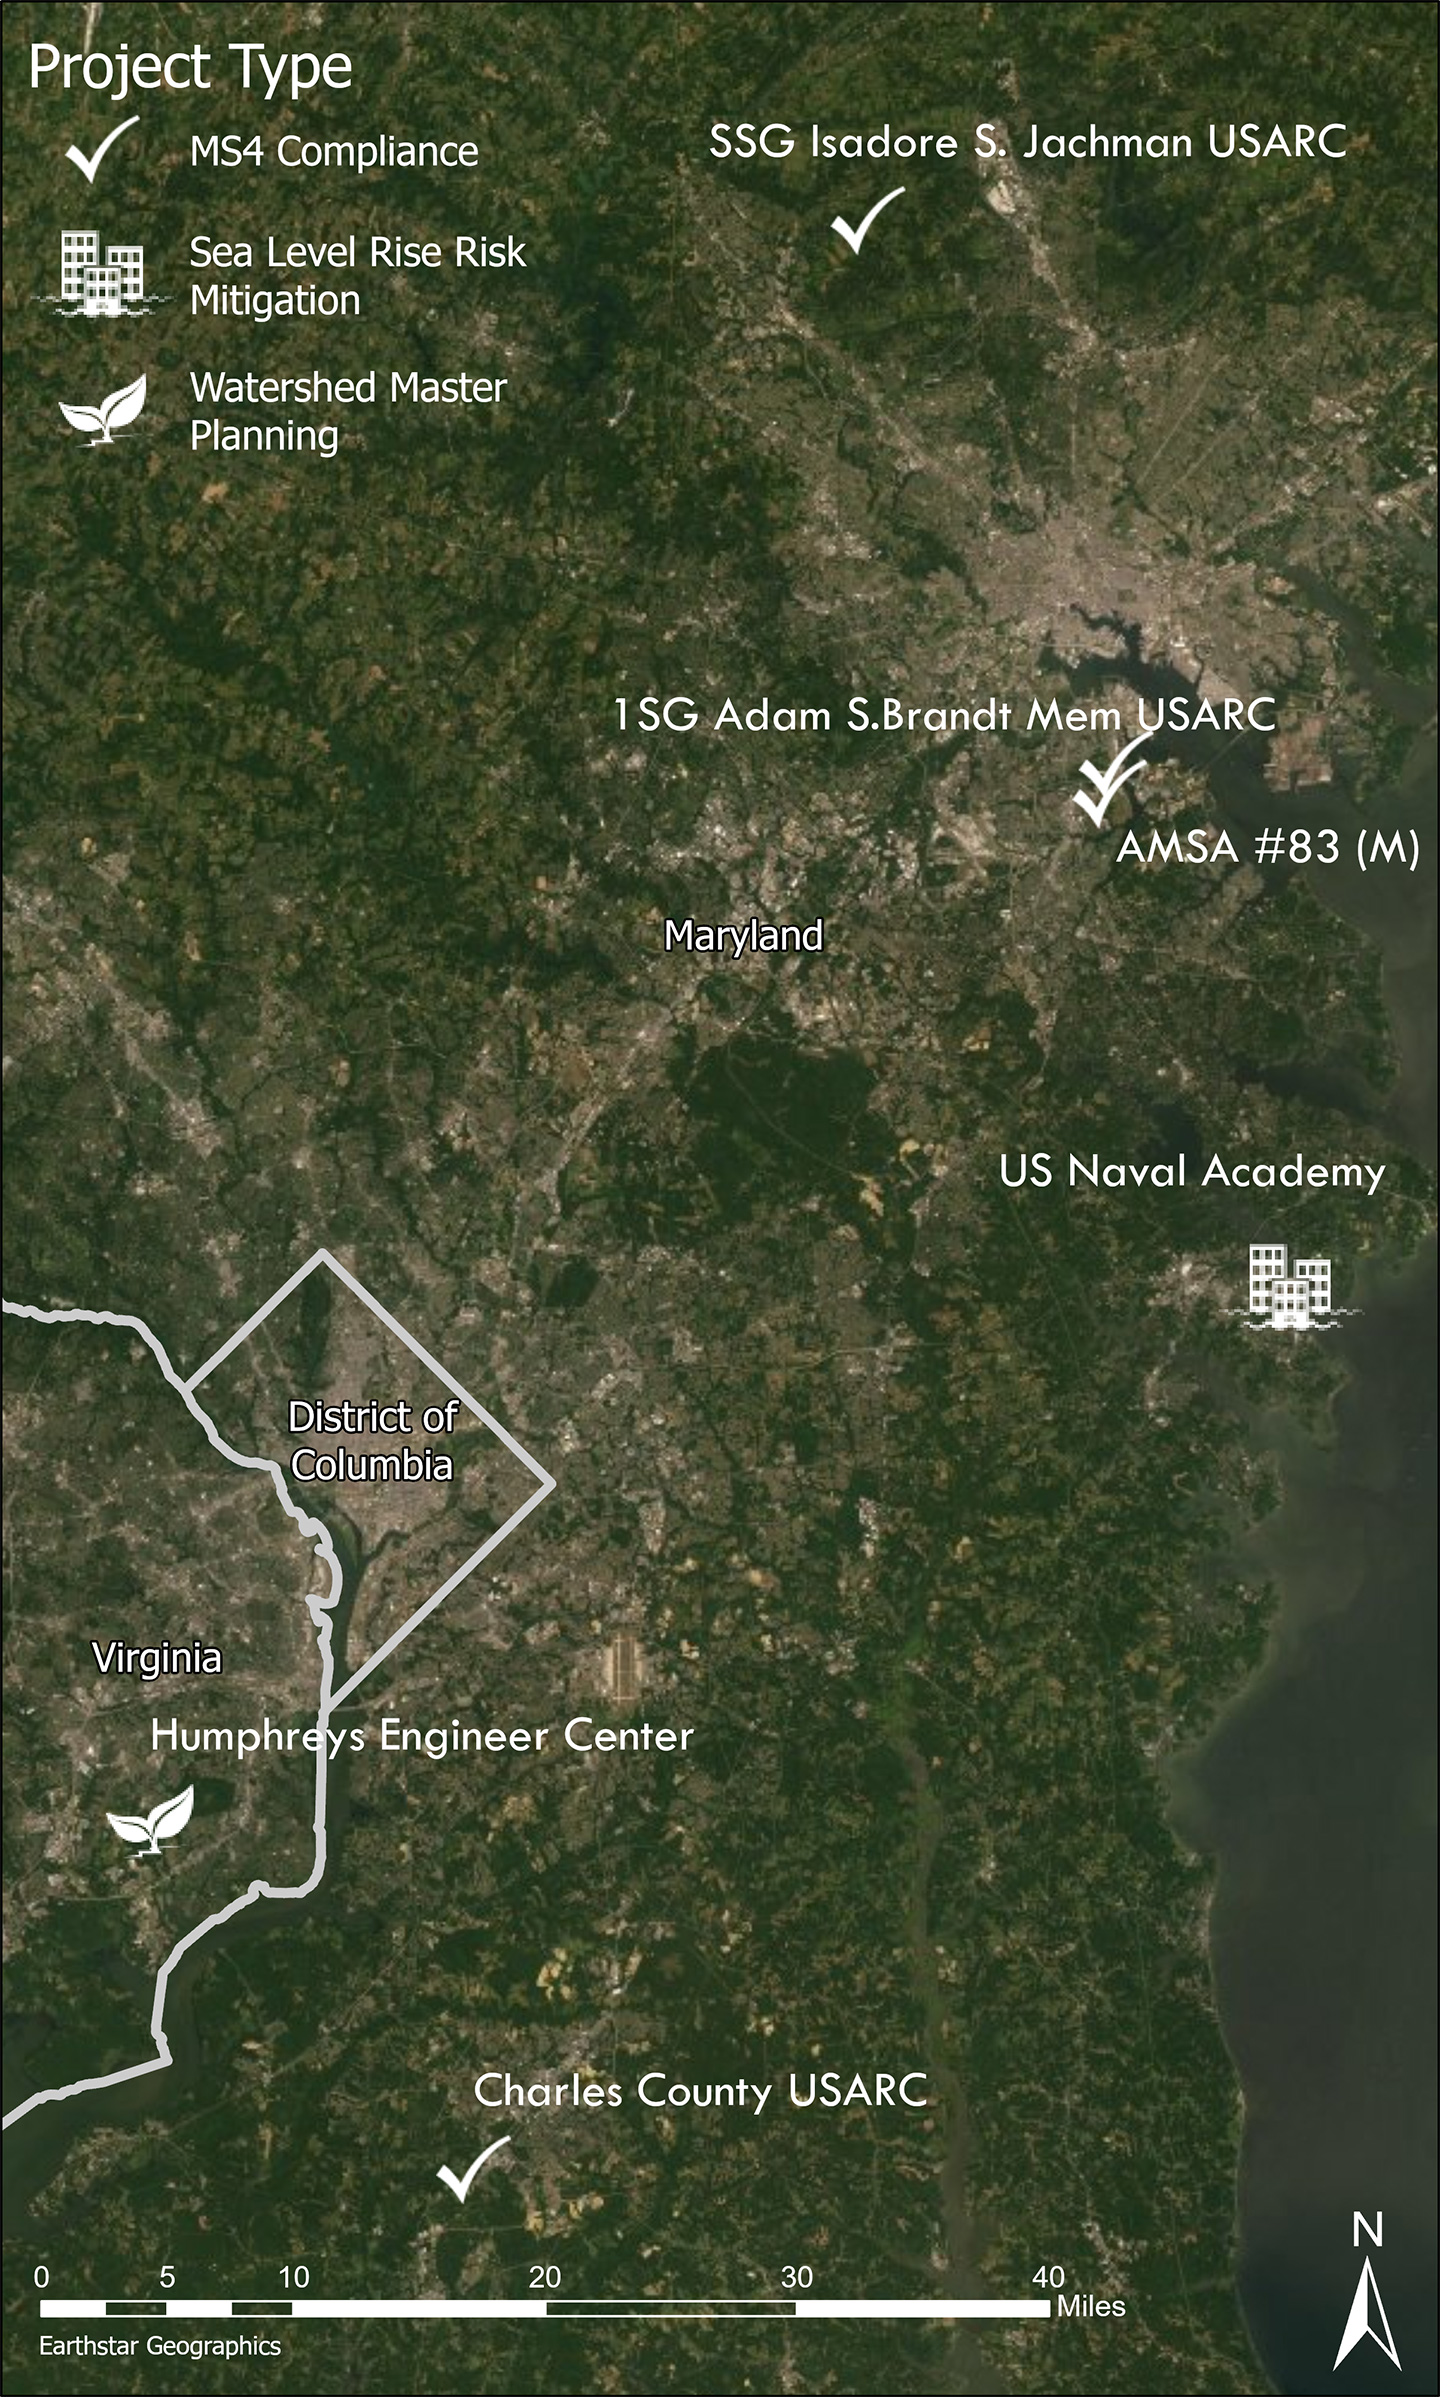 We are currently working on several DoD sites throughout the Virginia and Maryland to provide MS4 compliance, sea level rise mitigation, and watershed master planning.